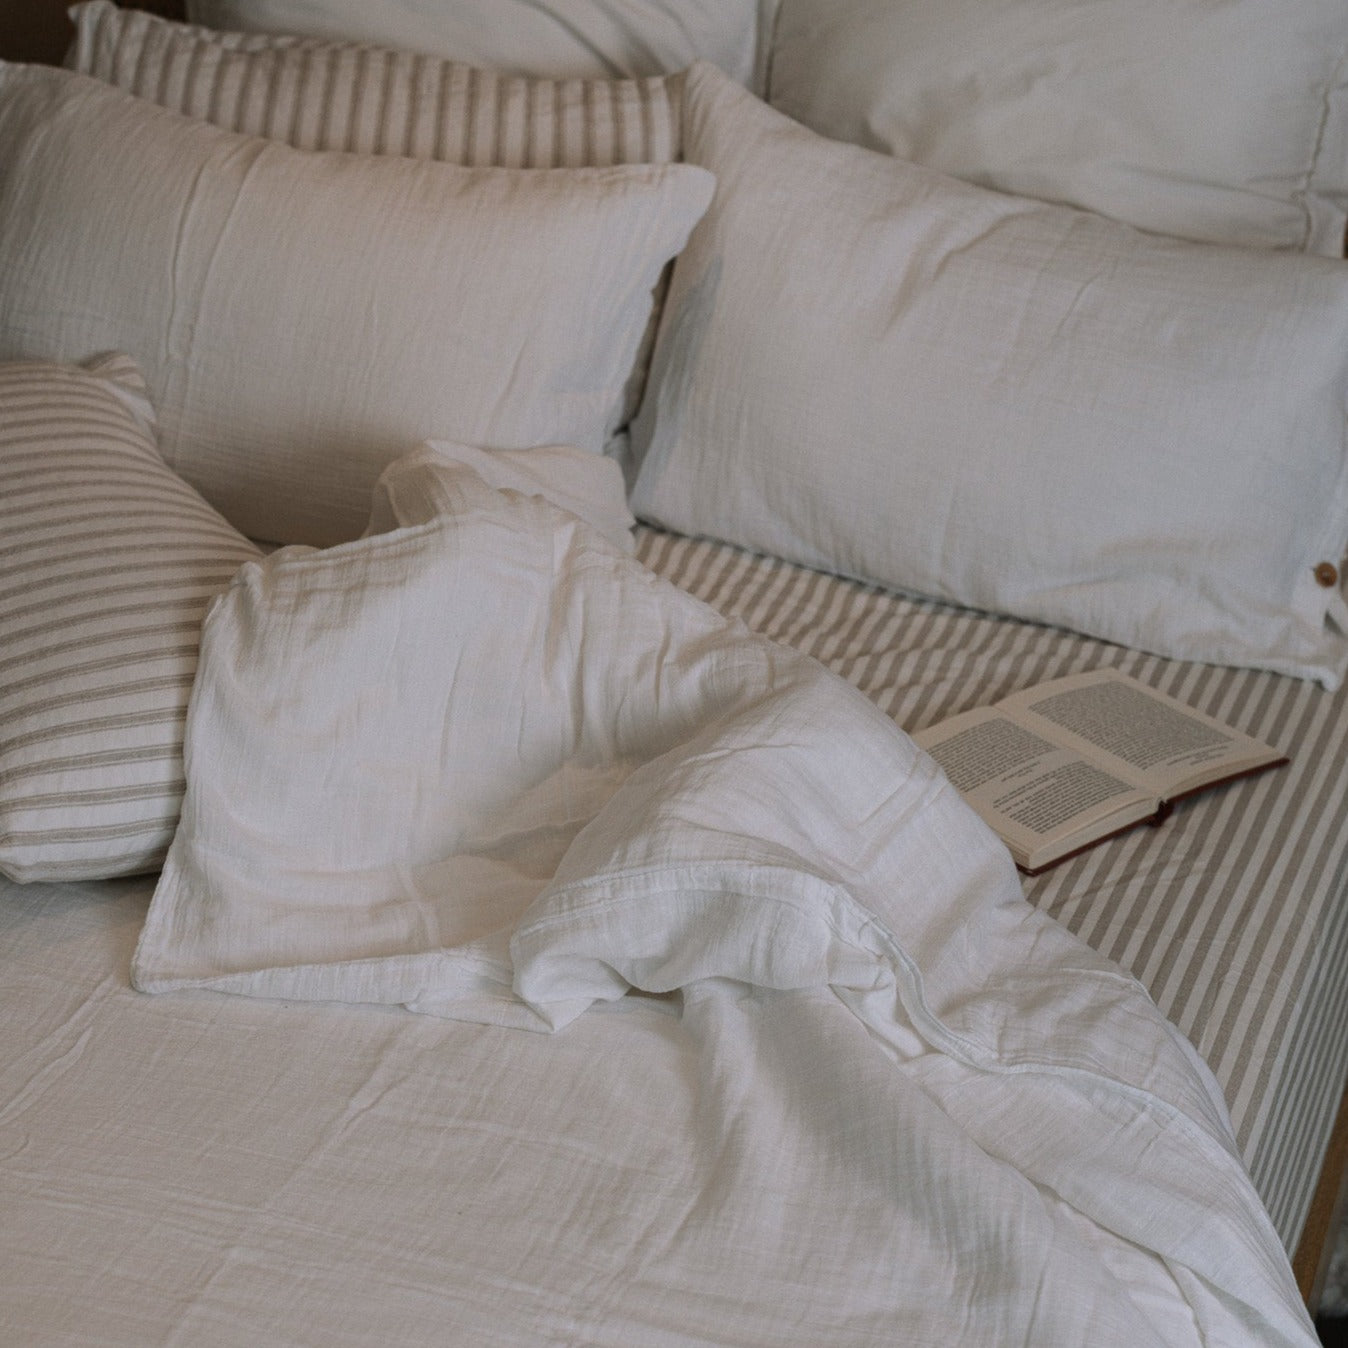 unmade white and striped bedding with an open book.